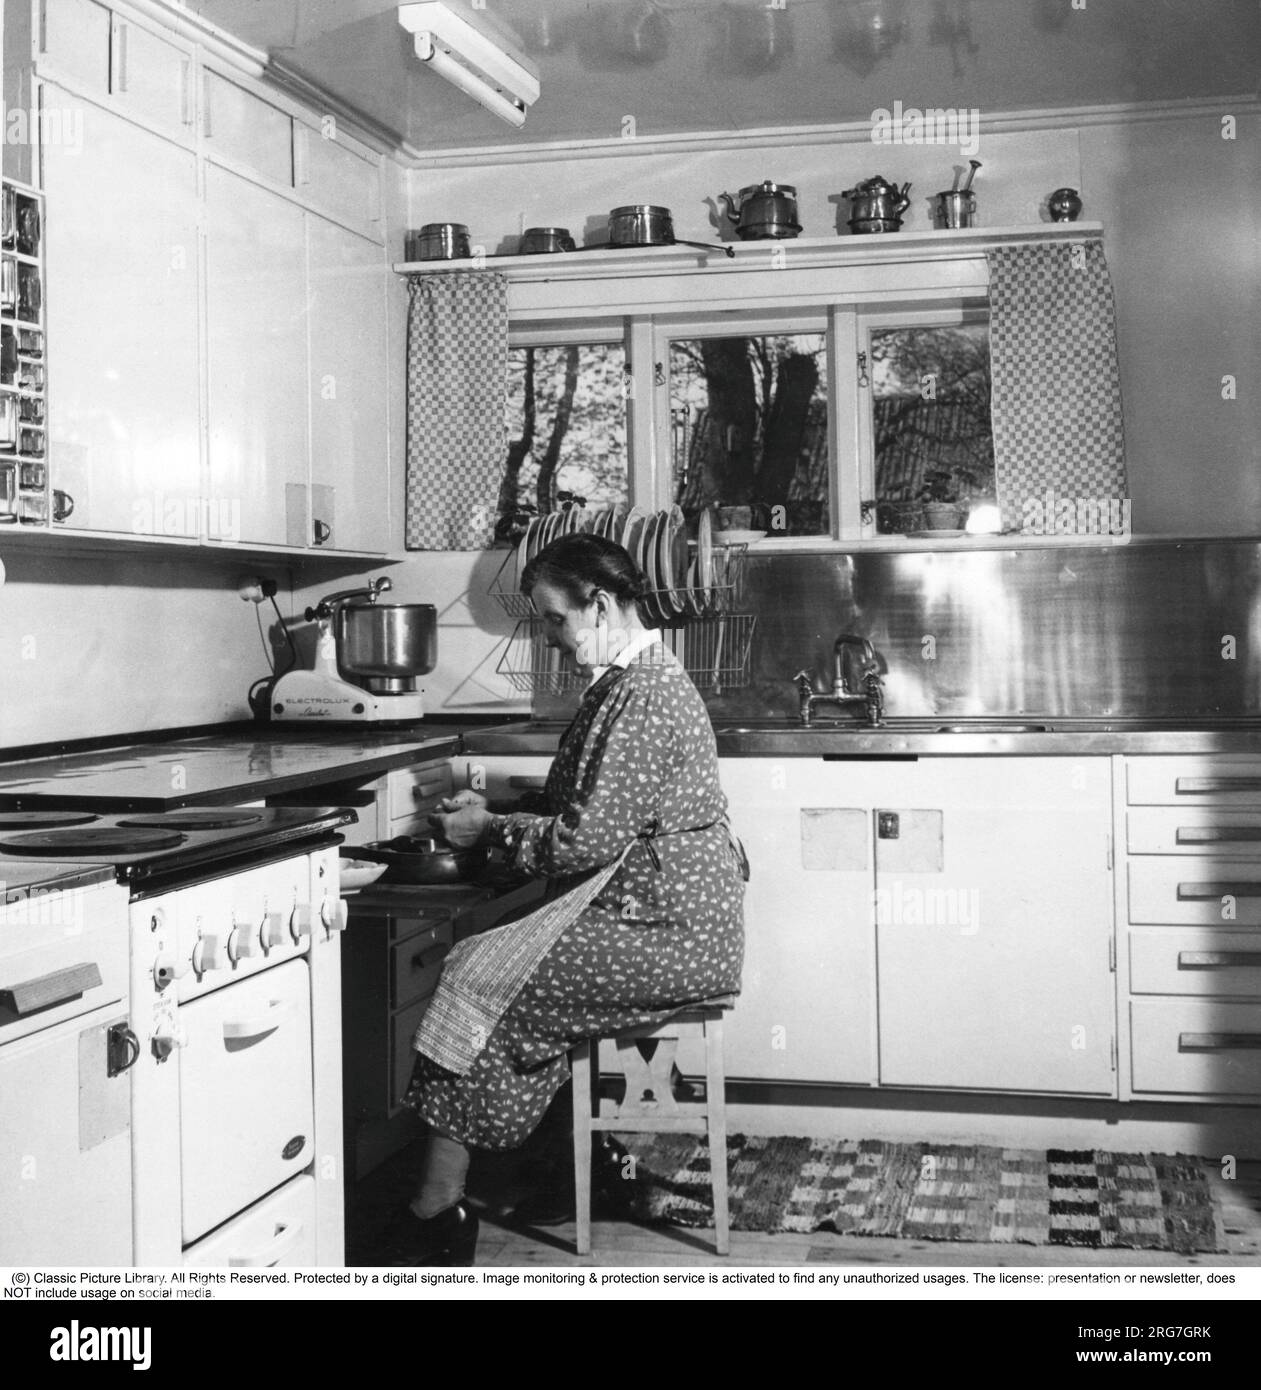 In the 1940s. An elderly woman in a typical 1940s kitchen with the details of the interior and the objects being very representative of the decade. A household assistant, kitchen machine, is an electrical appliance whose basic function is to mix and process dough and it's seen standing on the bench.    Actually, household assistant is a brand word taken from the Electrolux model called Assistant. Electrolux has registered the word Assistant as a trademark. Unlike, for example, food processors and electric whisks, the processing in an assistant takes place at a significantly lower speed, which Stock Photo